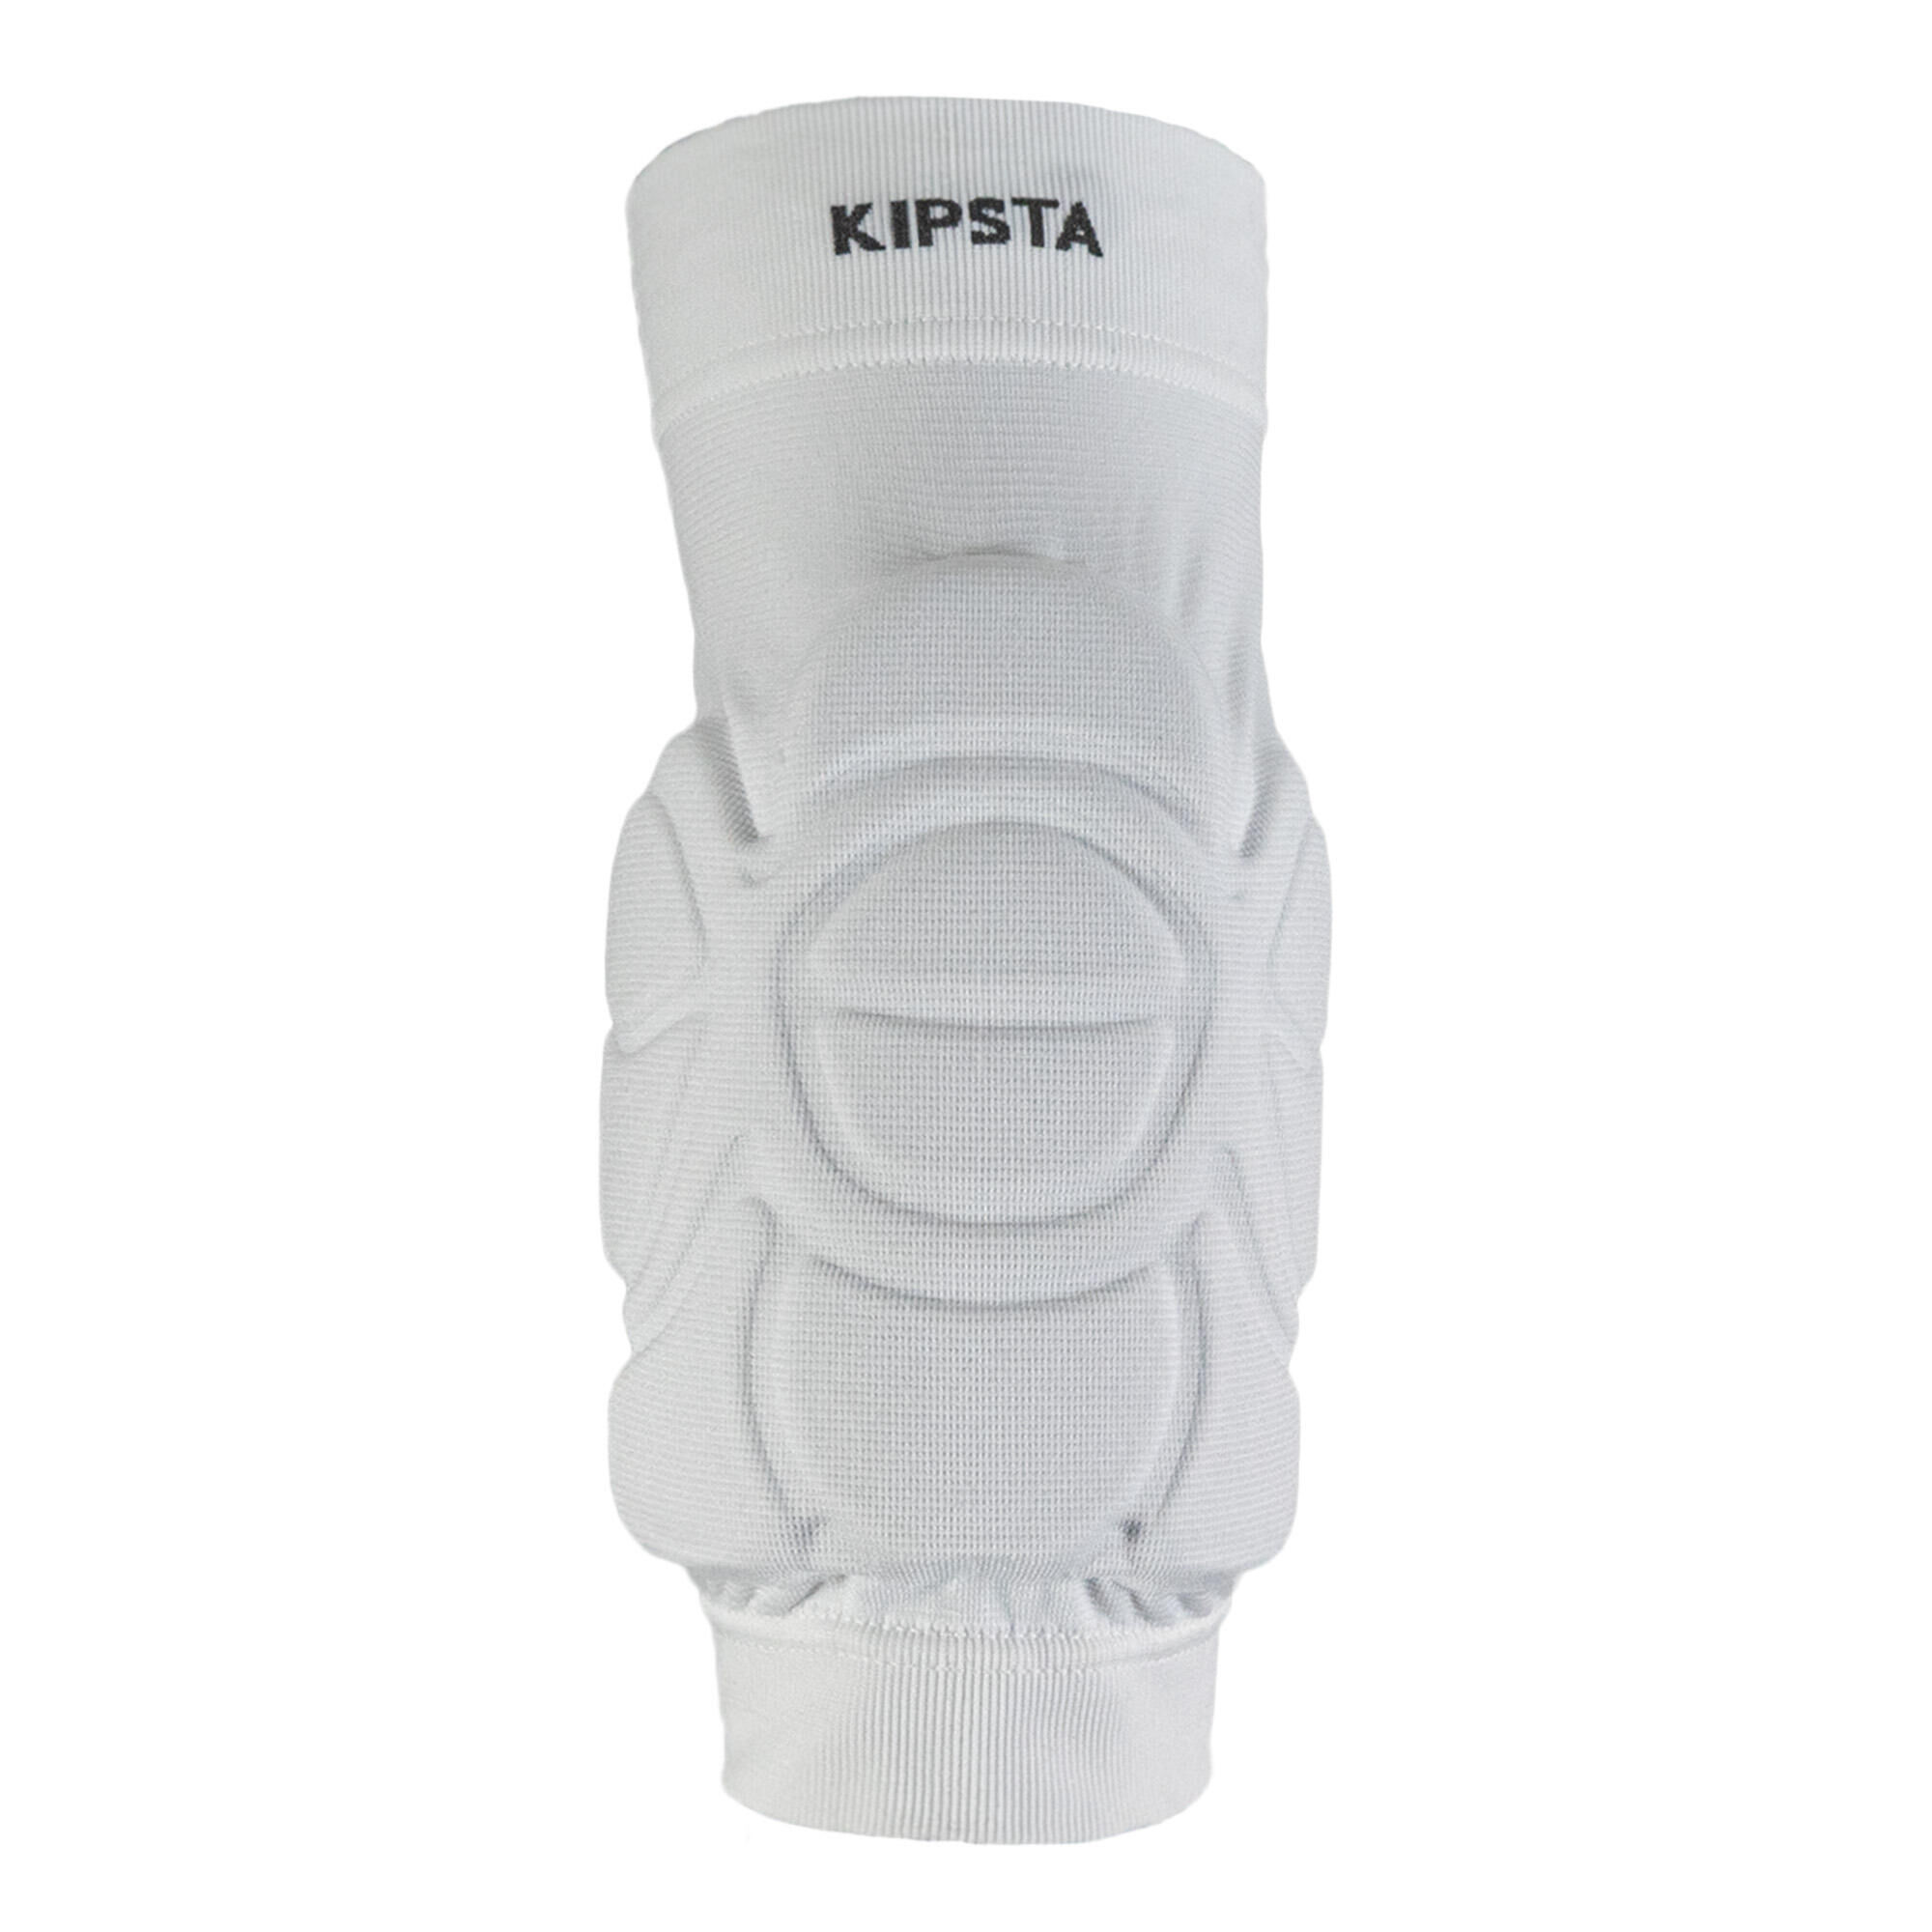 KIPSTA Volleyball Knee Pads for Intensive Play - White